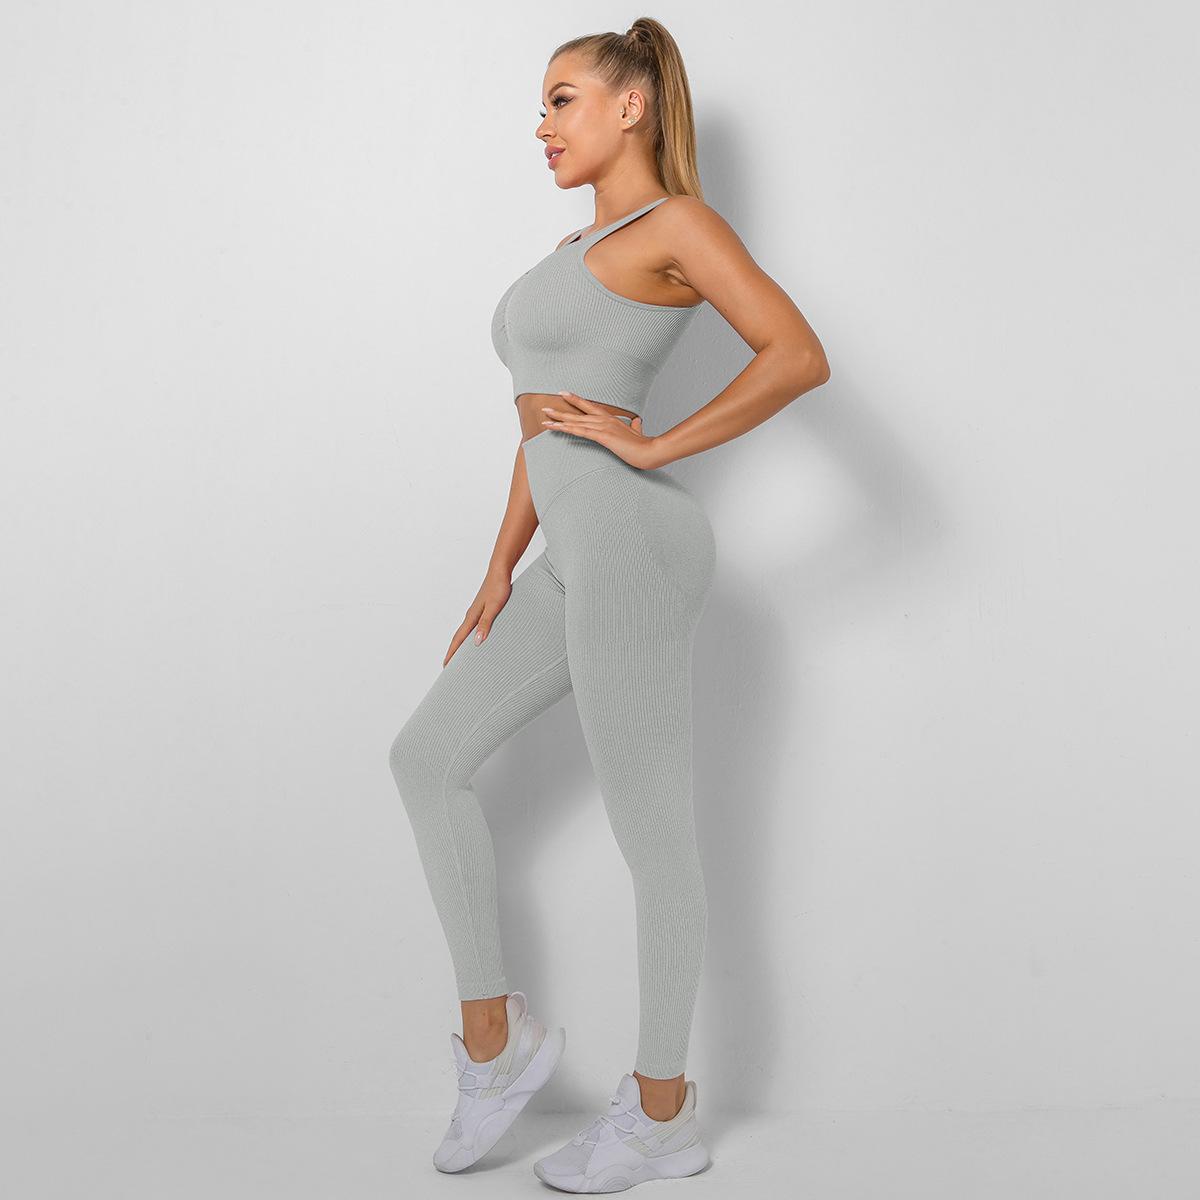 Seamless Knitted Workout Exercise Outfit - activewear - sports set - Sports Sets - malbusaat.co.uk